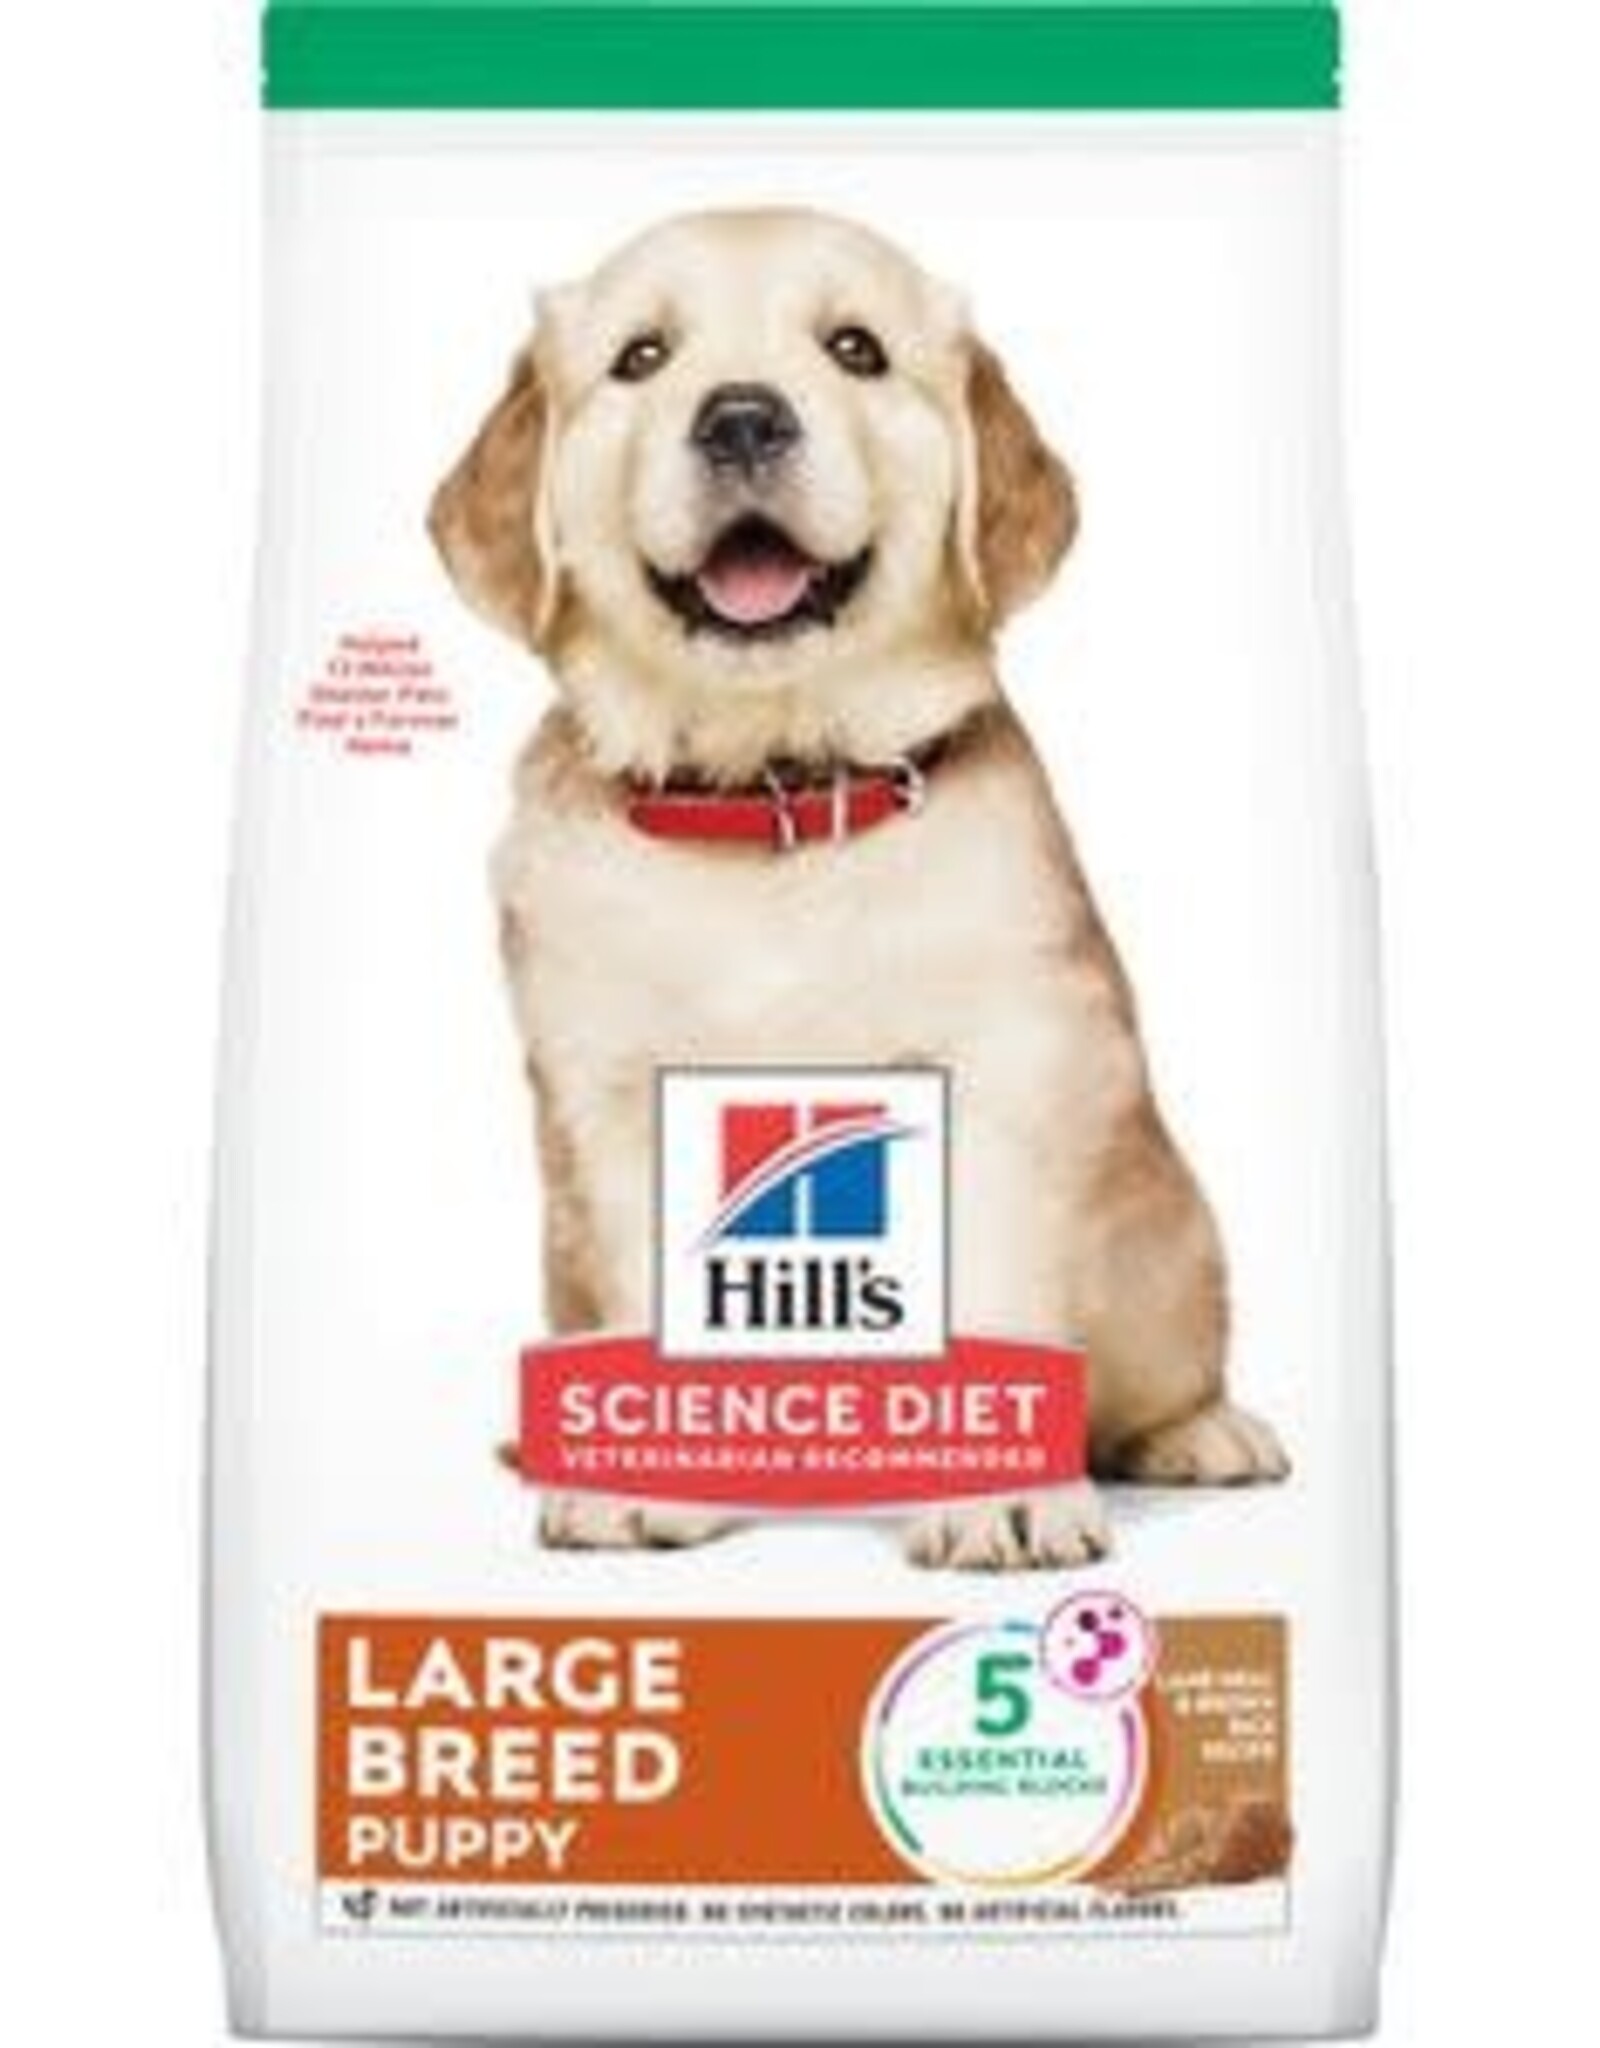 Hill's Science Diet Hill's SD Canine Puppy LG Breed Lamb and Rice 30lb